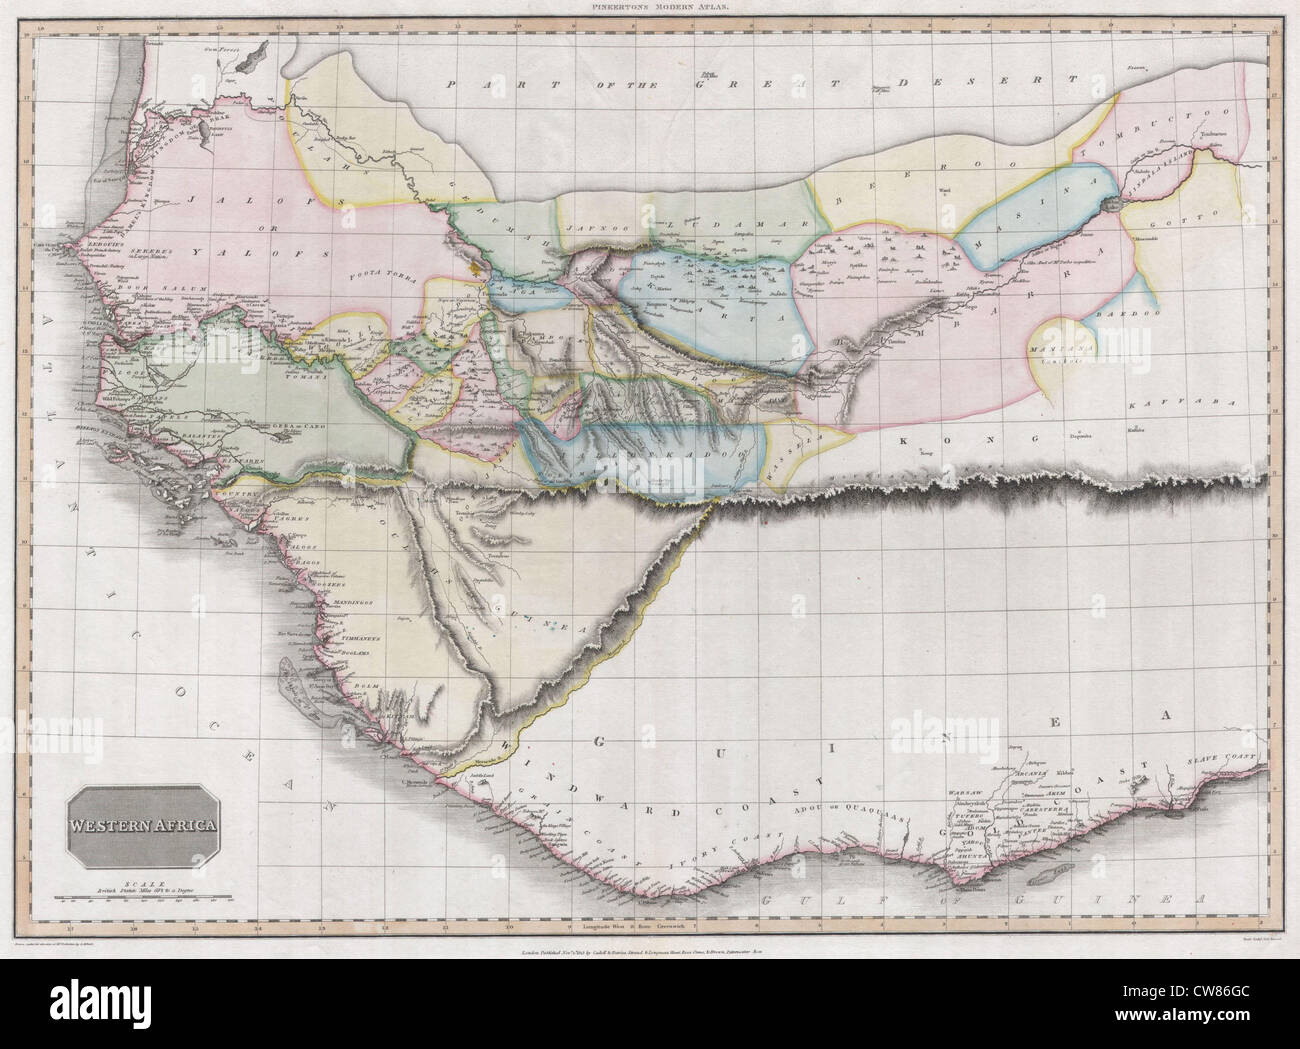 1813 Pinkerton Map of Western Africa (Niger Valley - Mountains of Kong Stock Photo